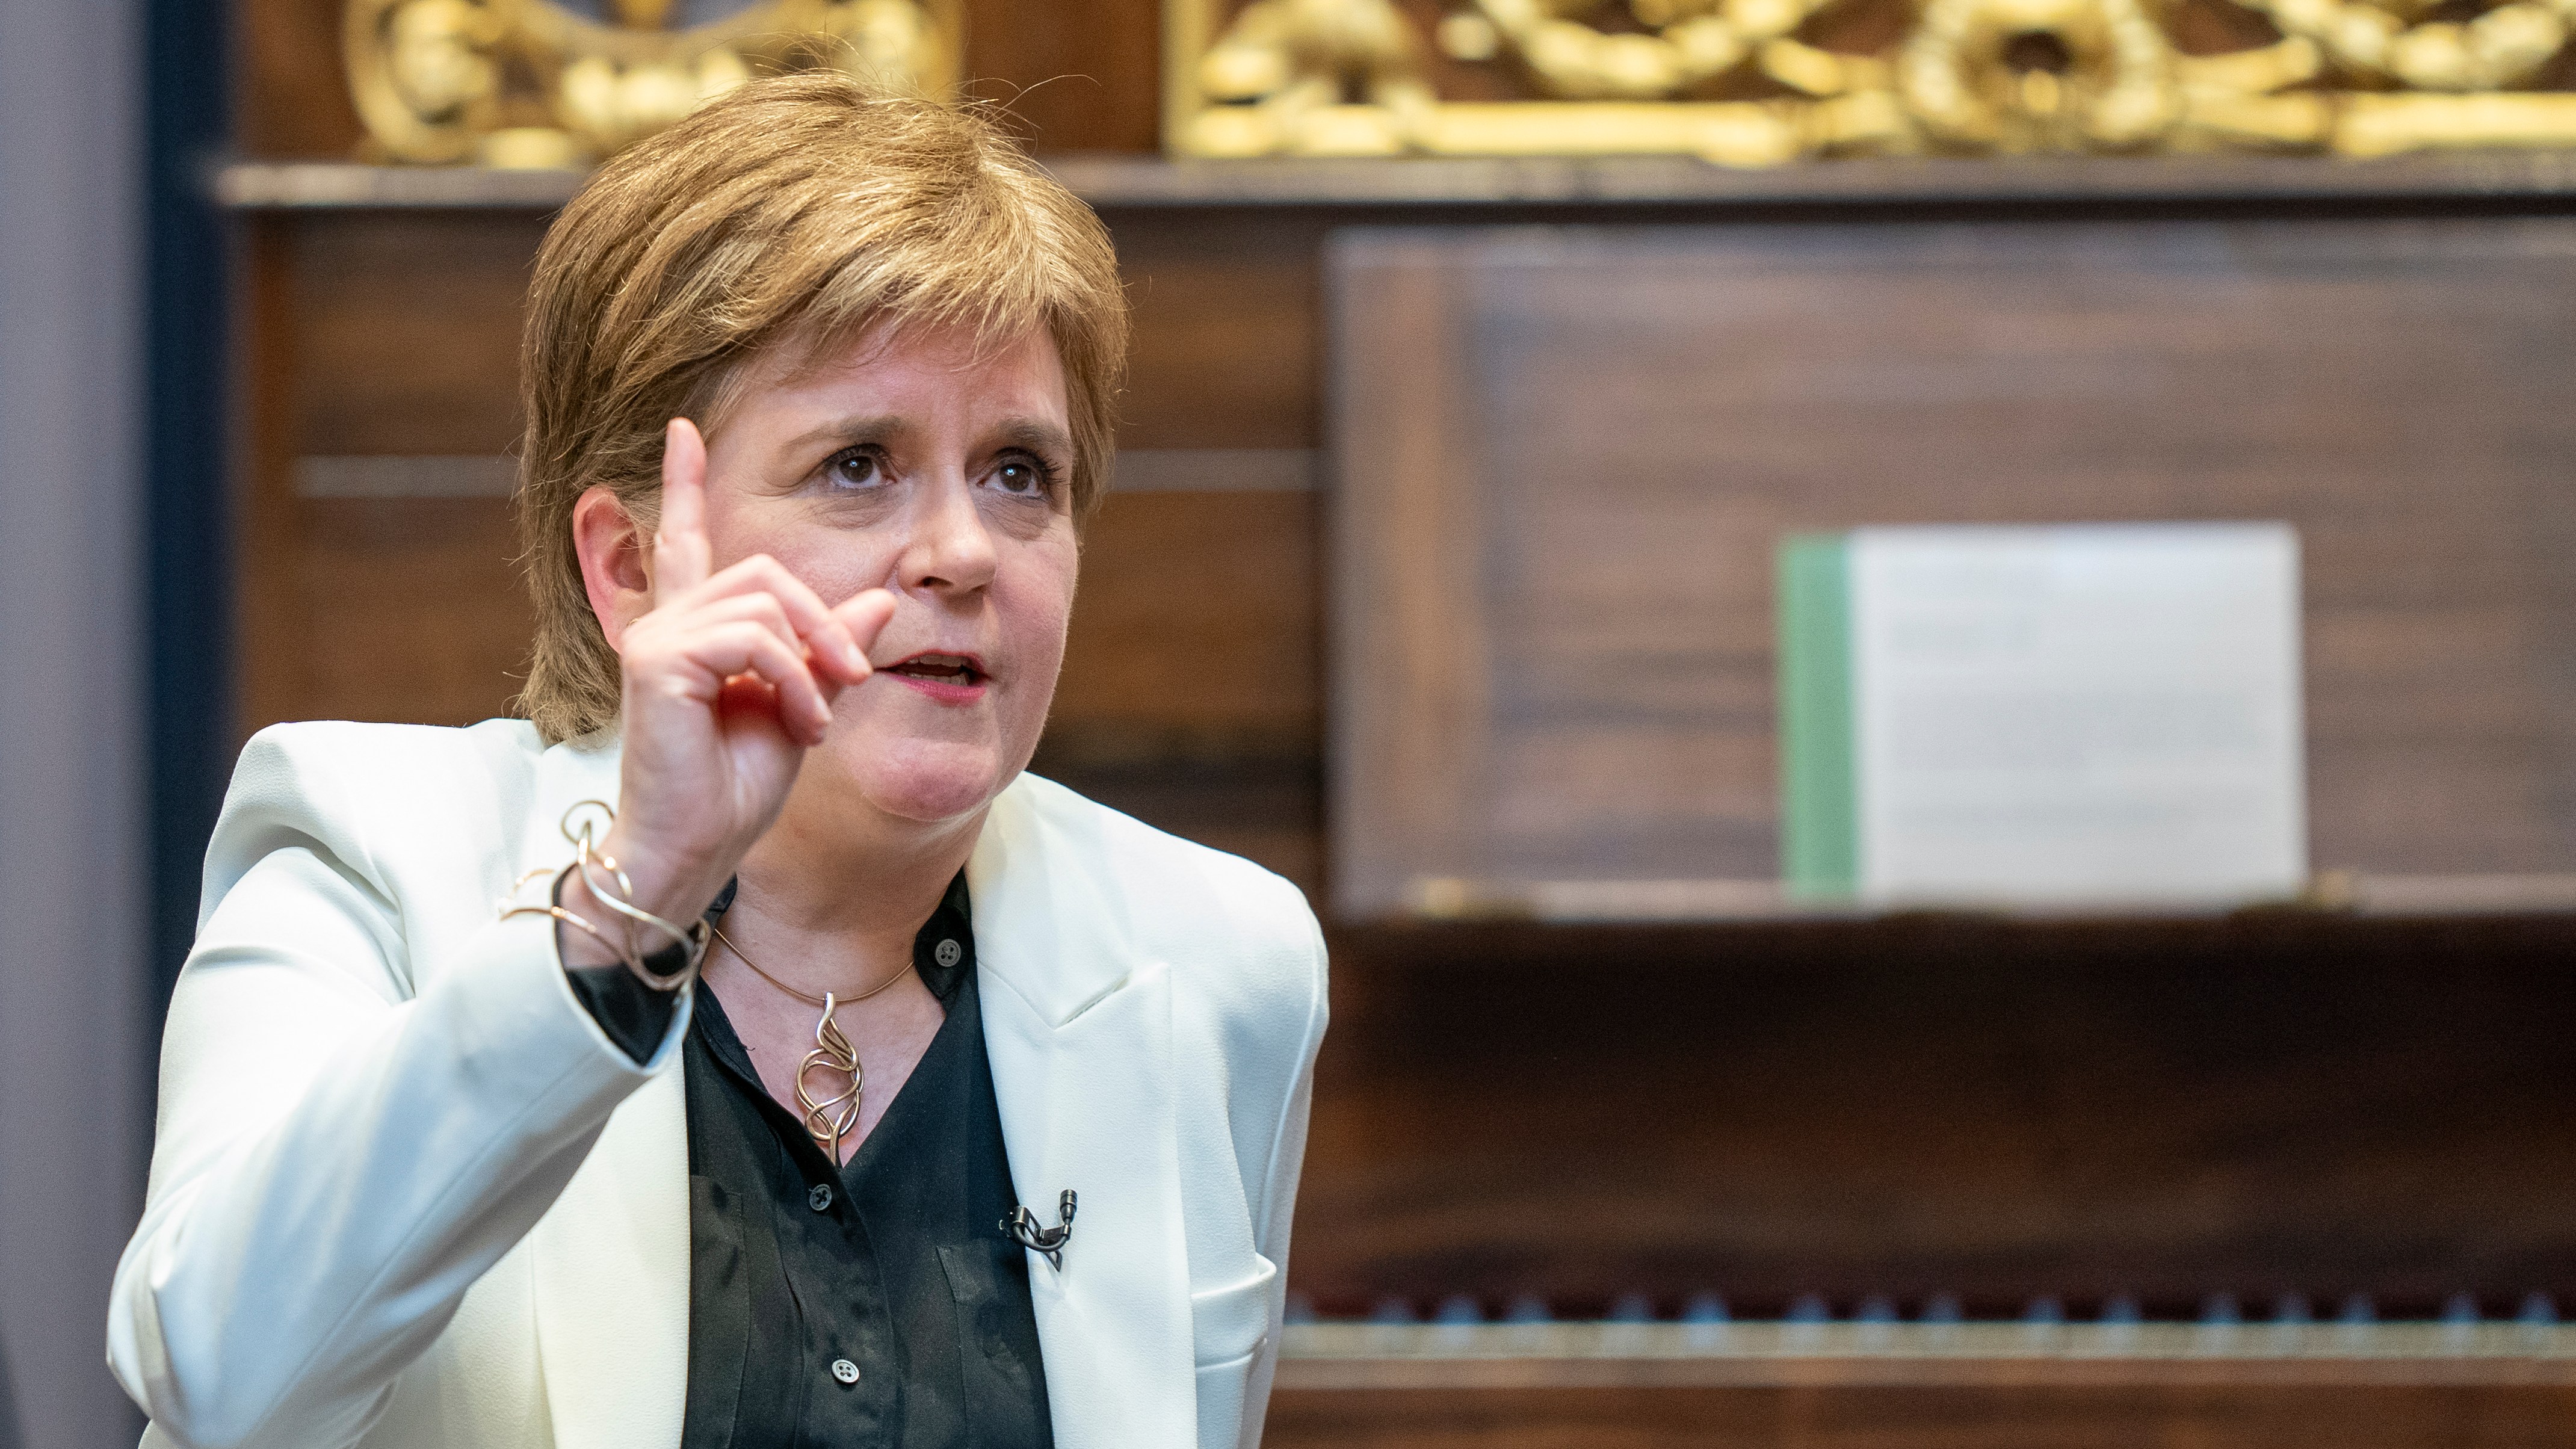 Nicola Sturgeon said any divisive proposals now “descend into the most vicious, toxic rammy, with bad faith arguments all over the place”